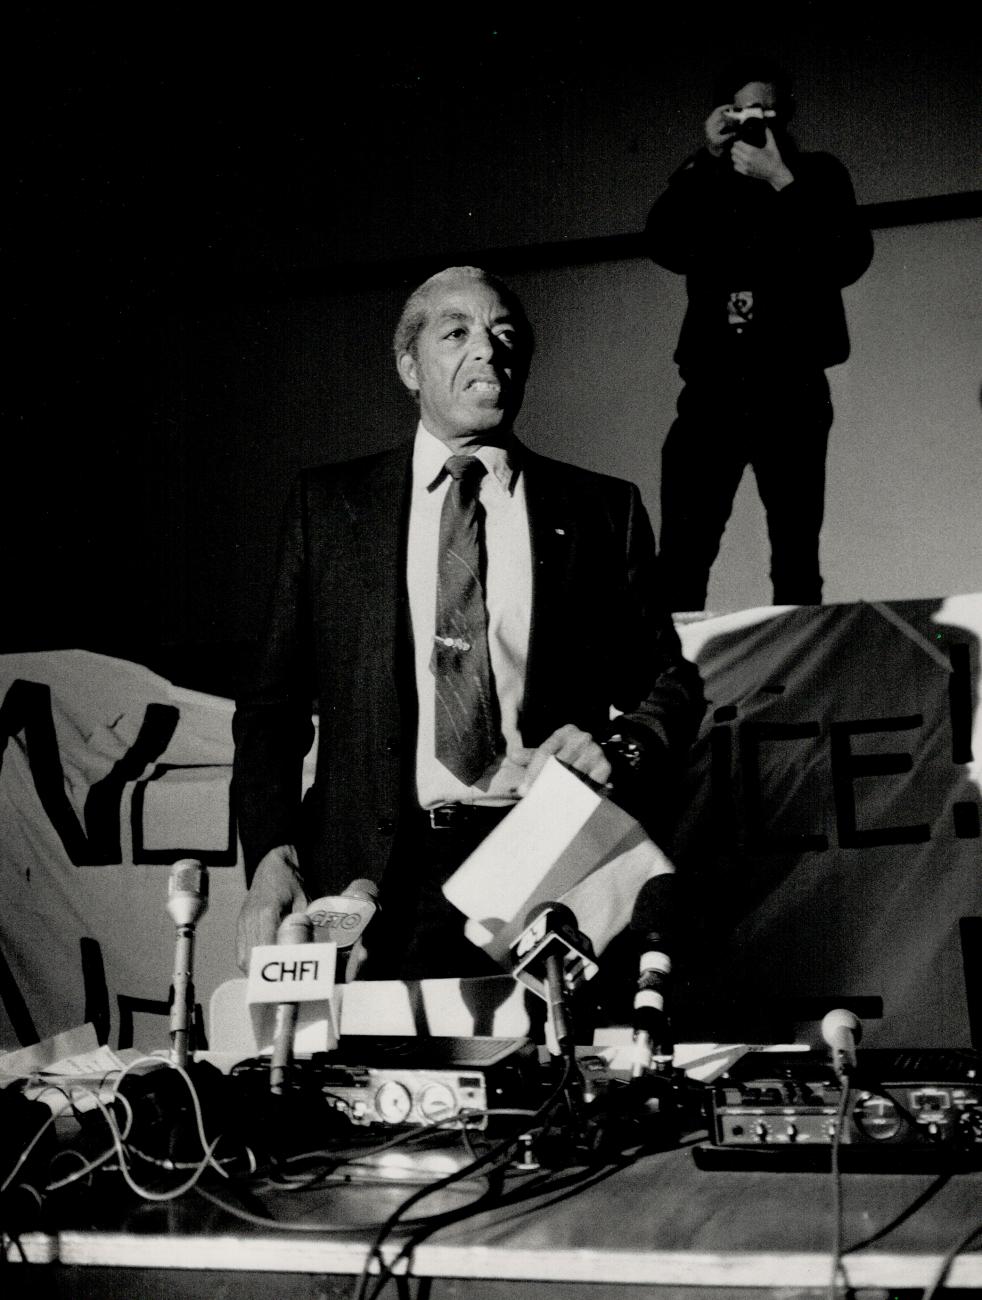 Bromley Armstrong in a suit and tie holding some paper, standing with several microphones in front of him.